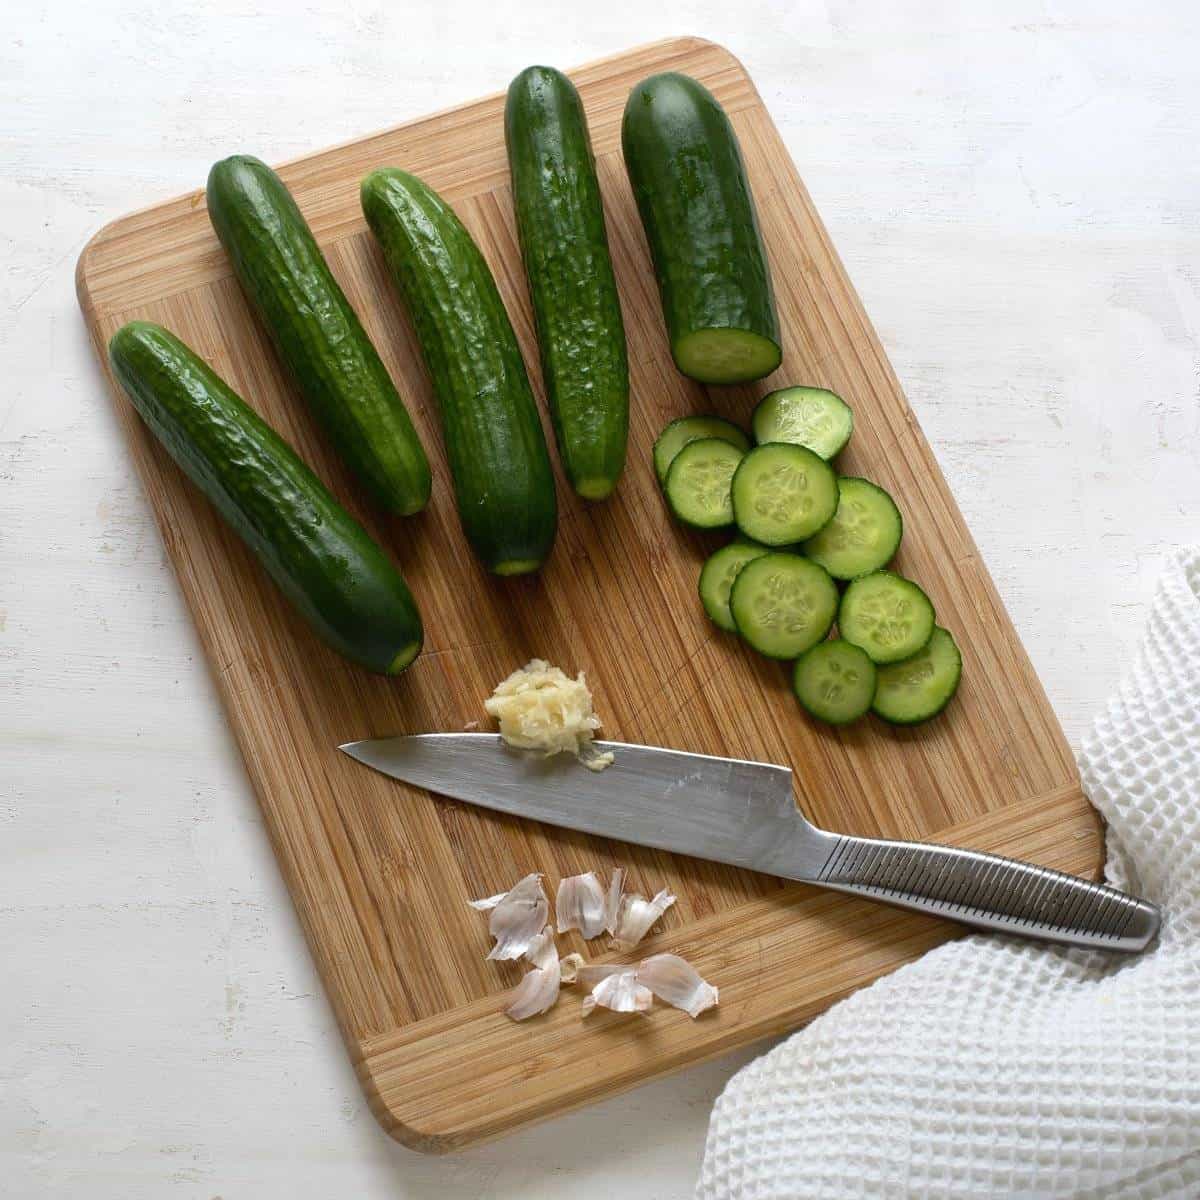 Slicing cucumbers and mashed garlic, on a kitchen wooden board, with a knife.